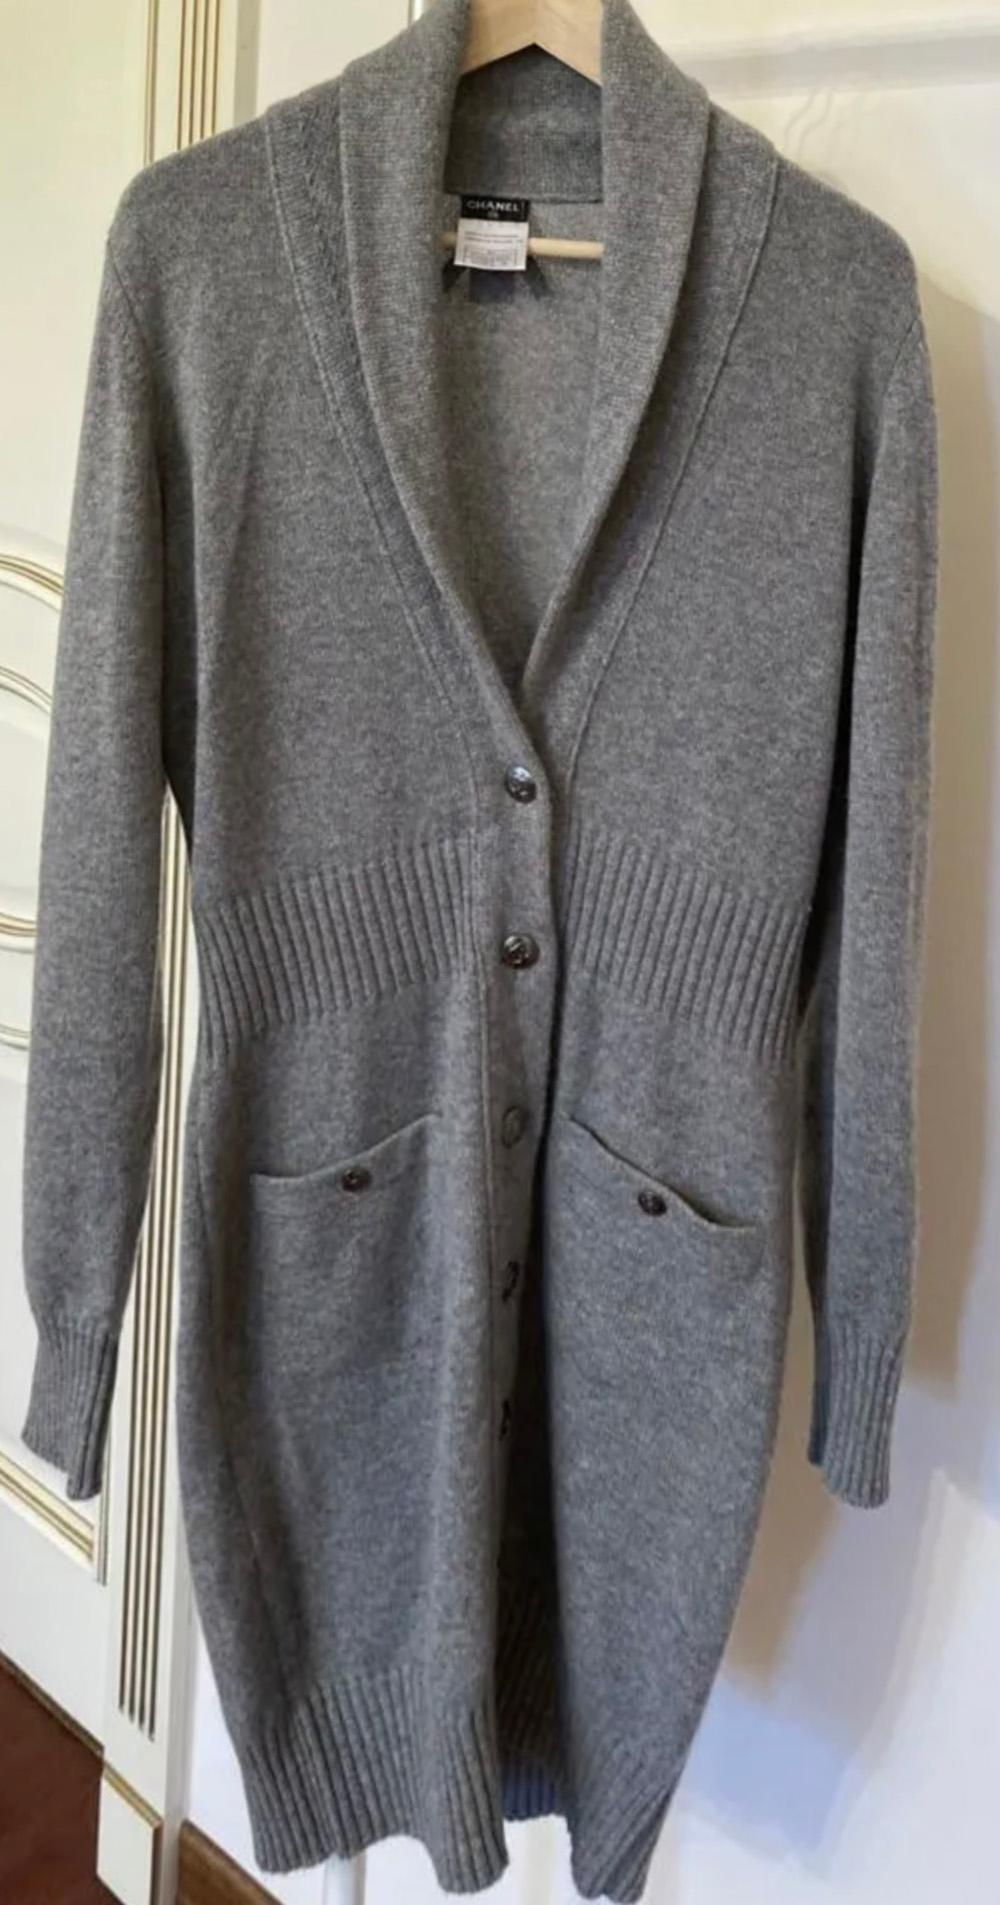 Chanel Claudia Schiffer Style CC Buttons Cashmere Cardigan For Sale 3